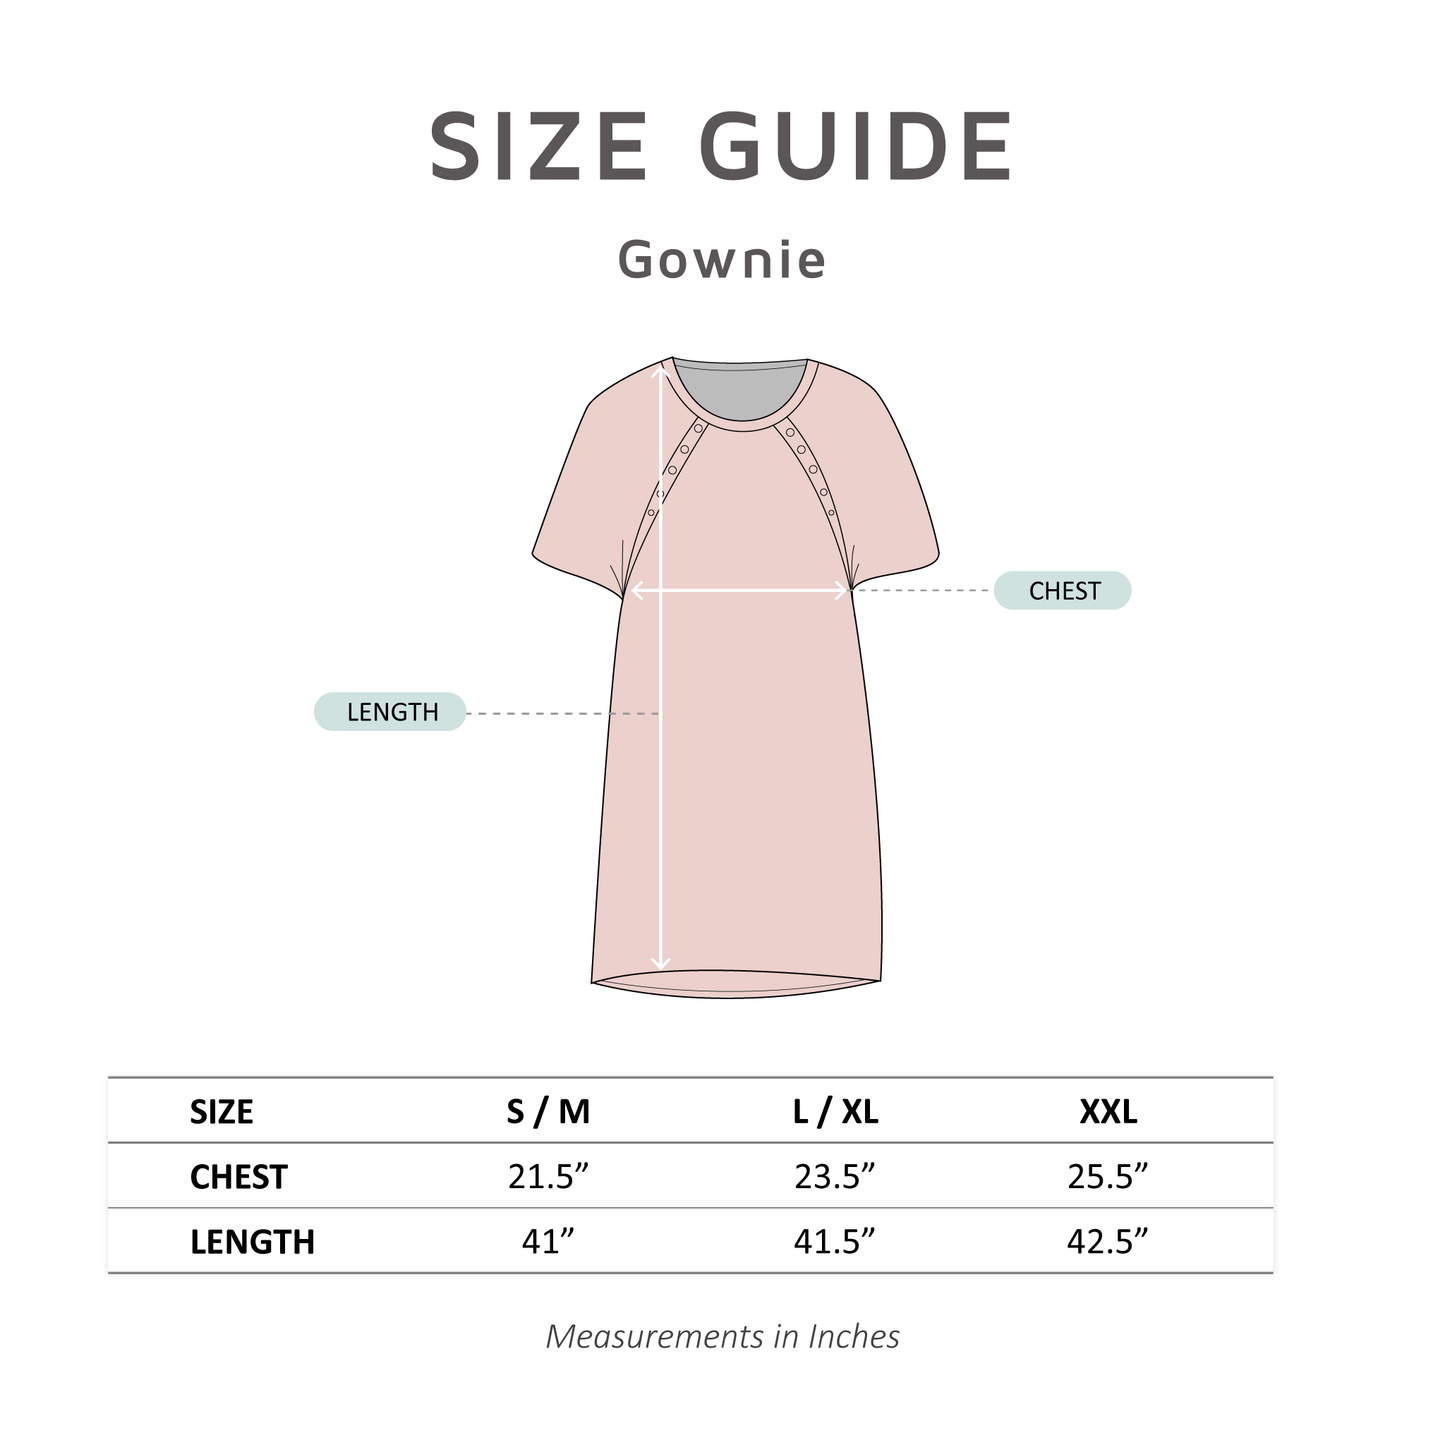 Serra Maternity Delivery Gownie